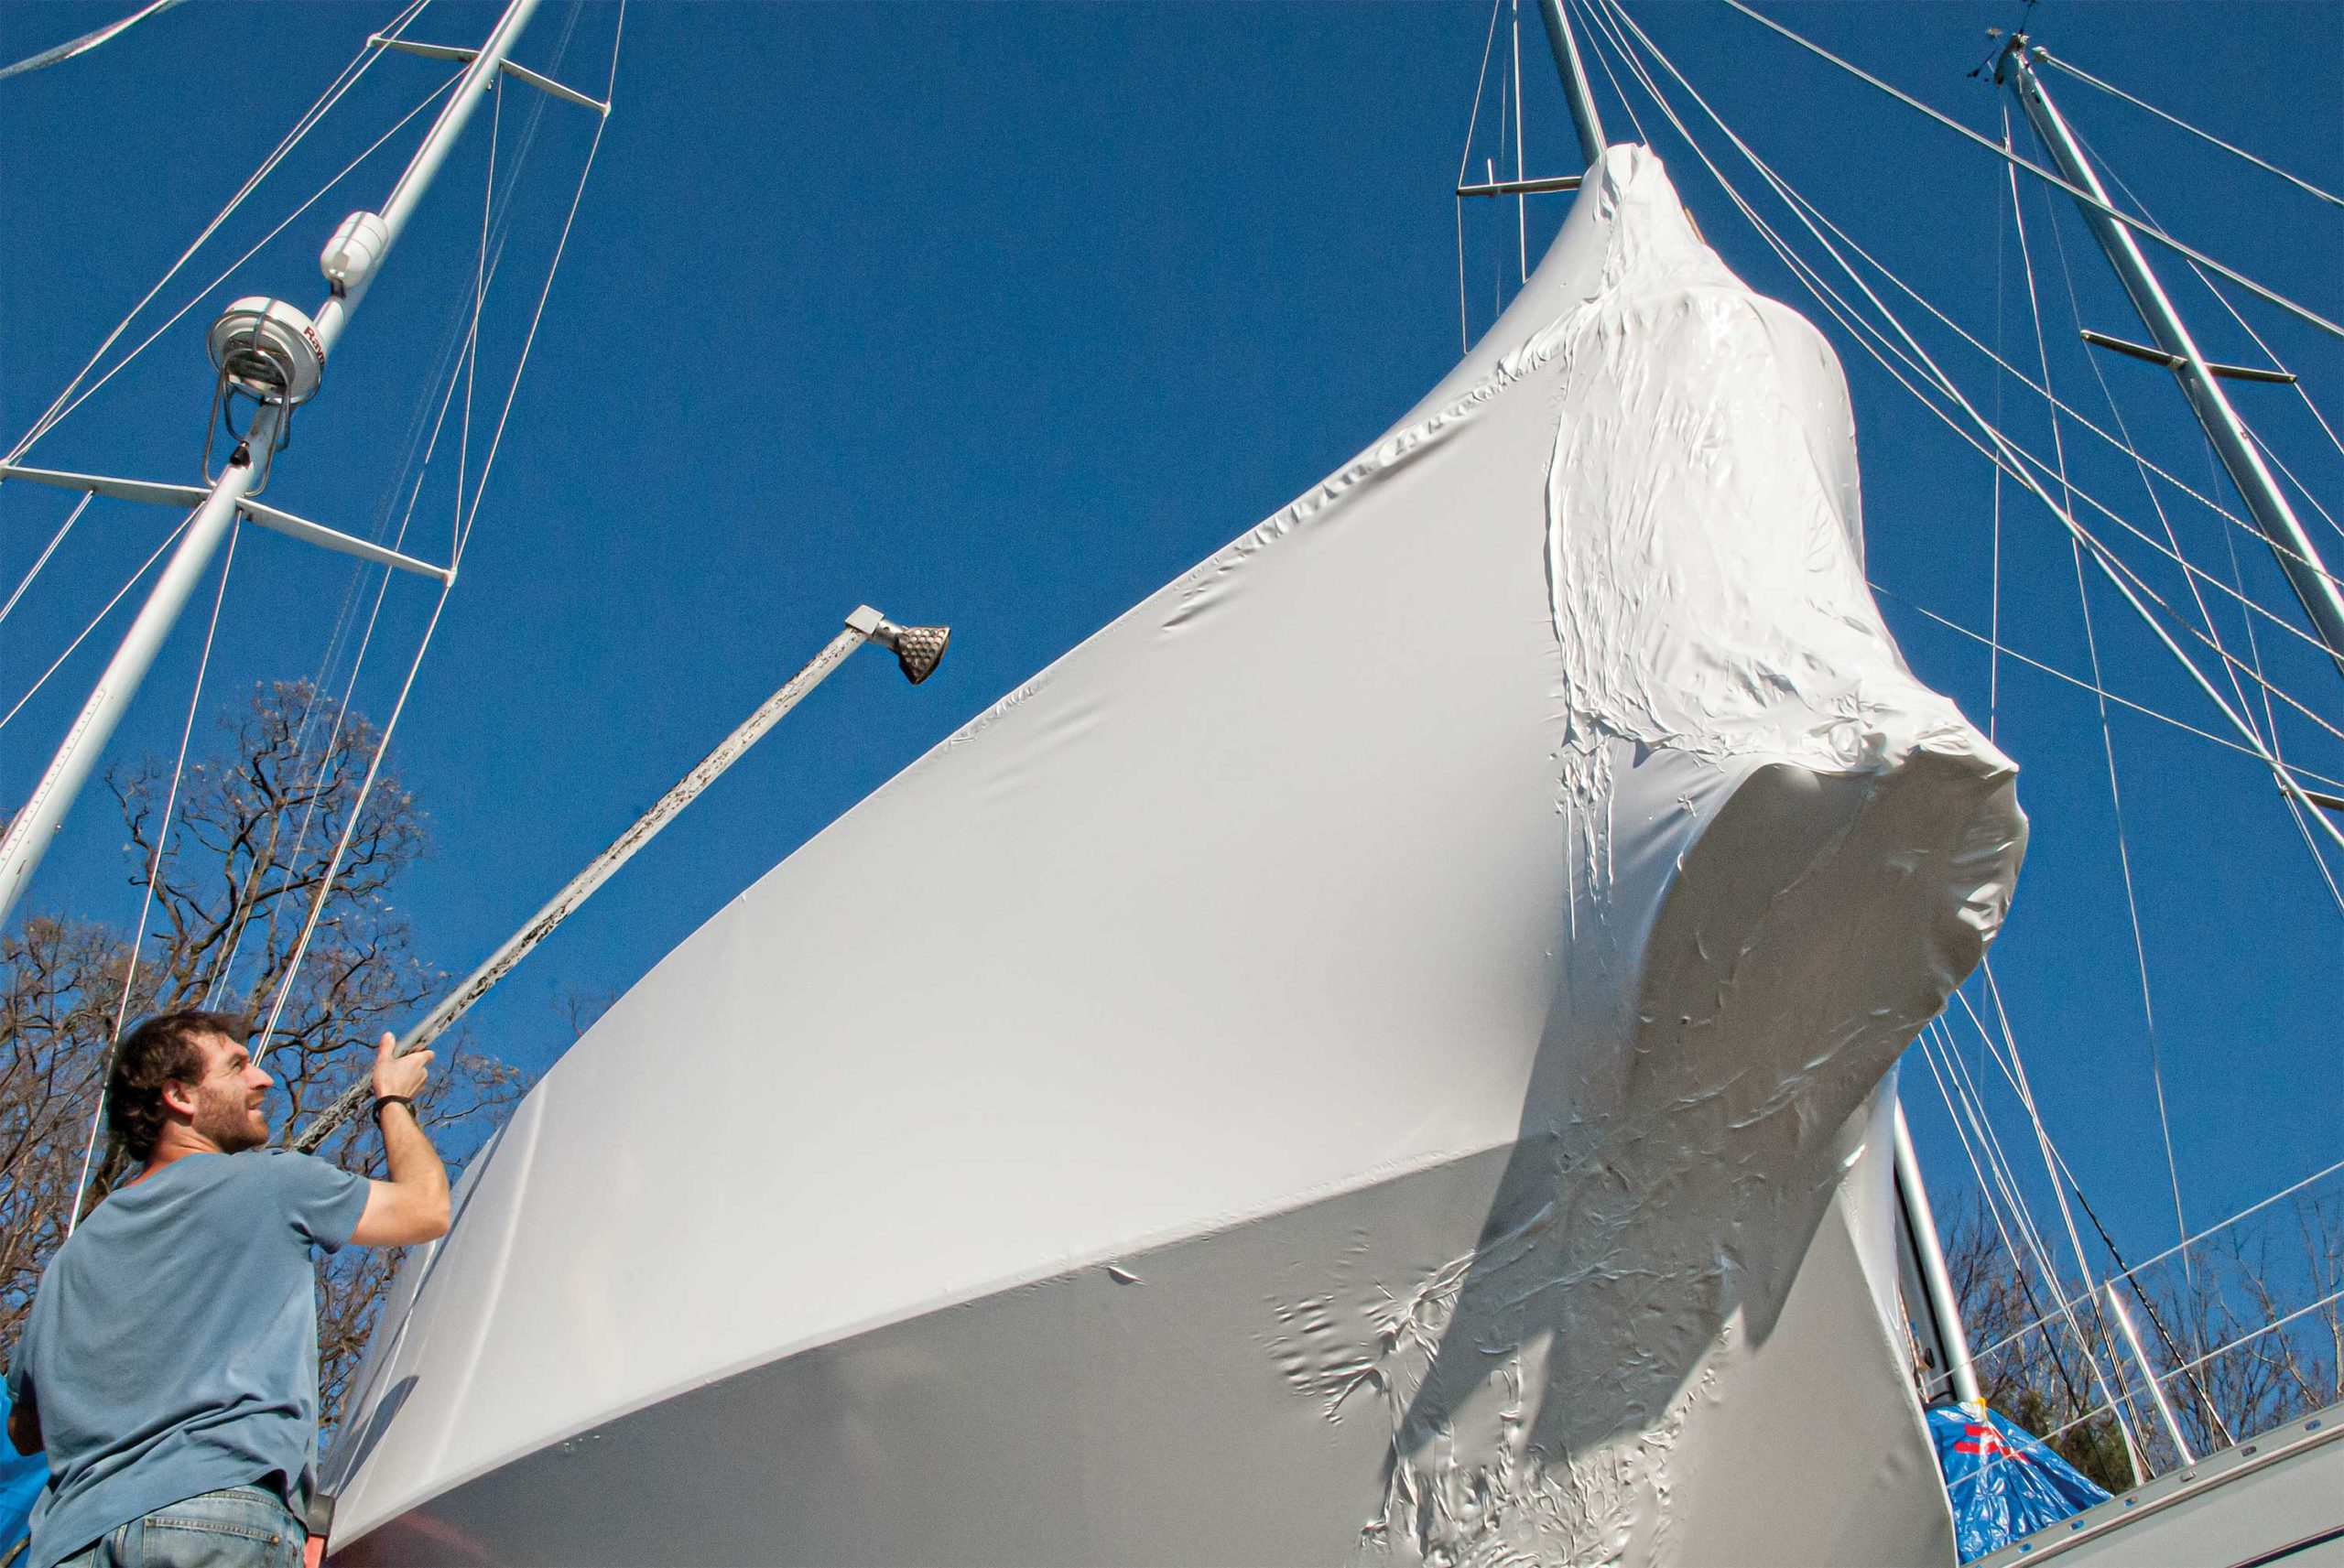 Boat & Marine Equipment Shrink Wrap Kits - Protect Your Boat From